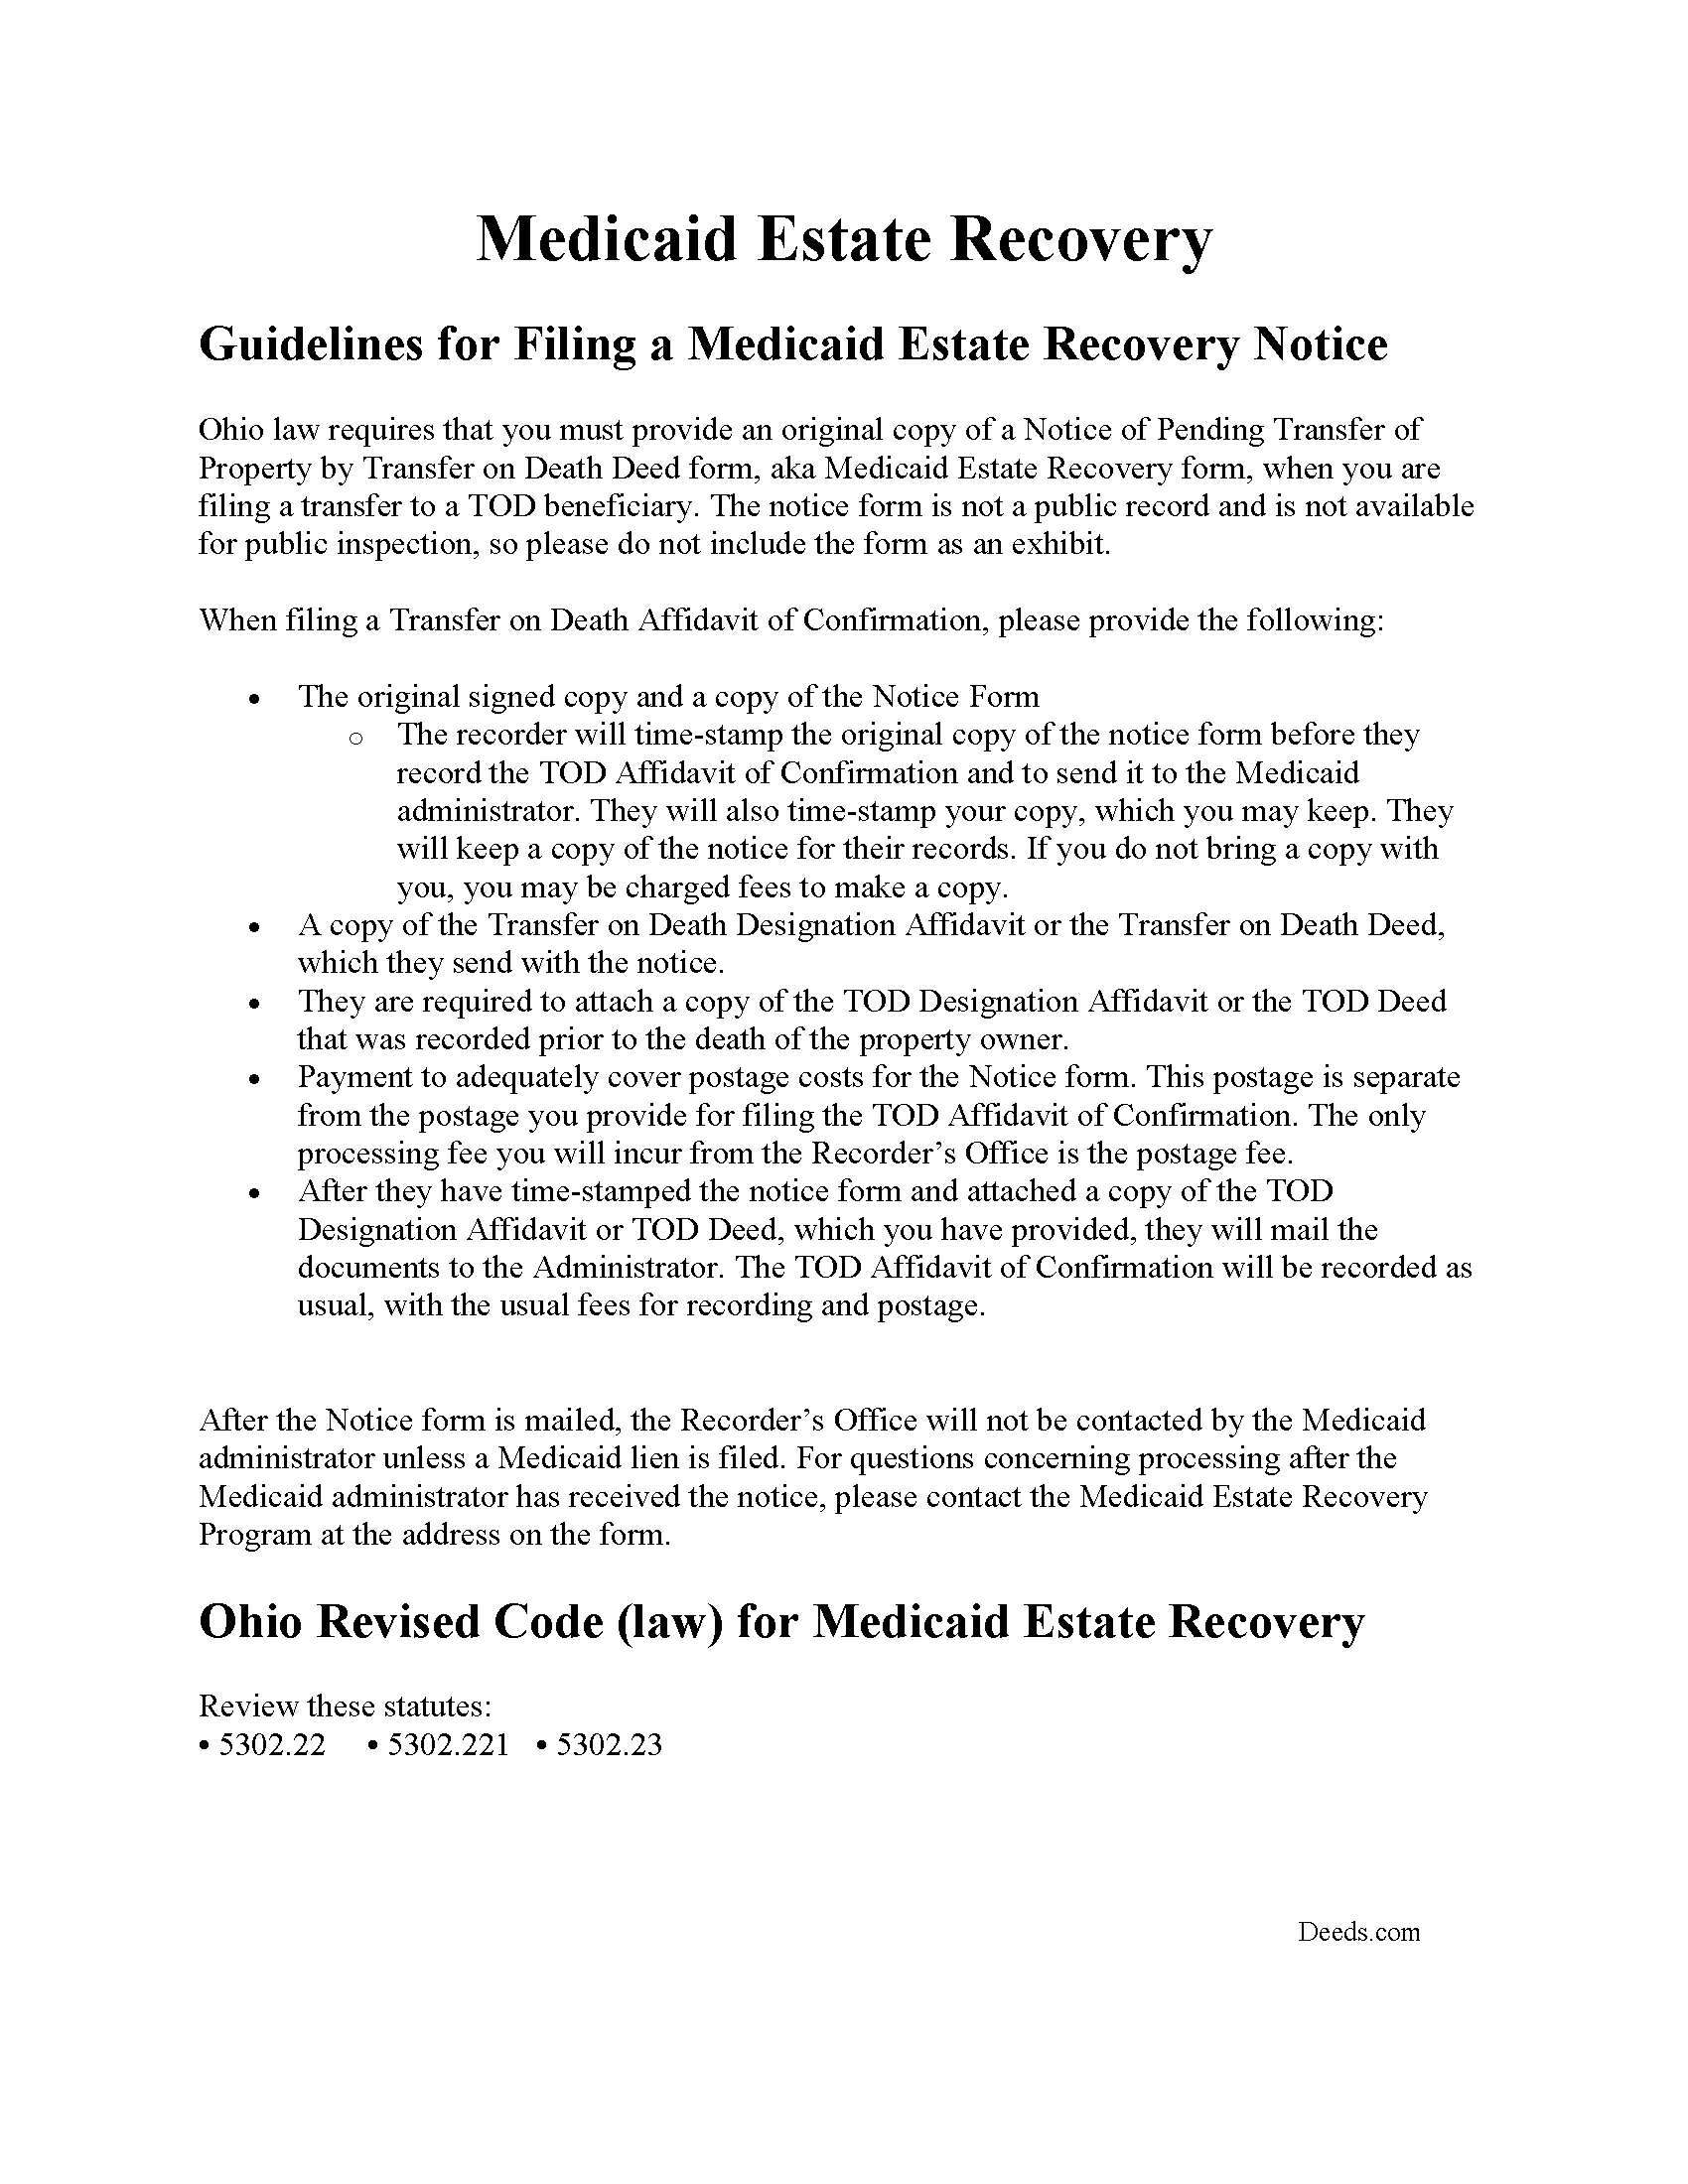 Notice to Medicaid Estate Recovery Program Guide